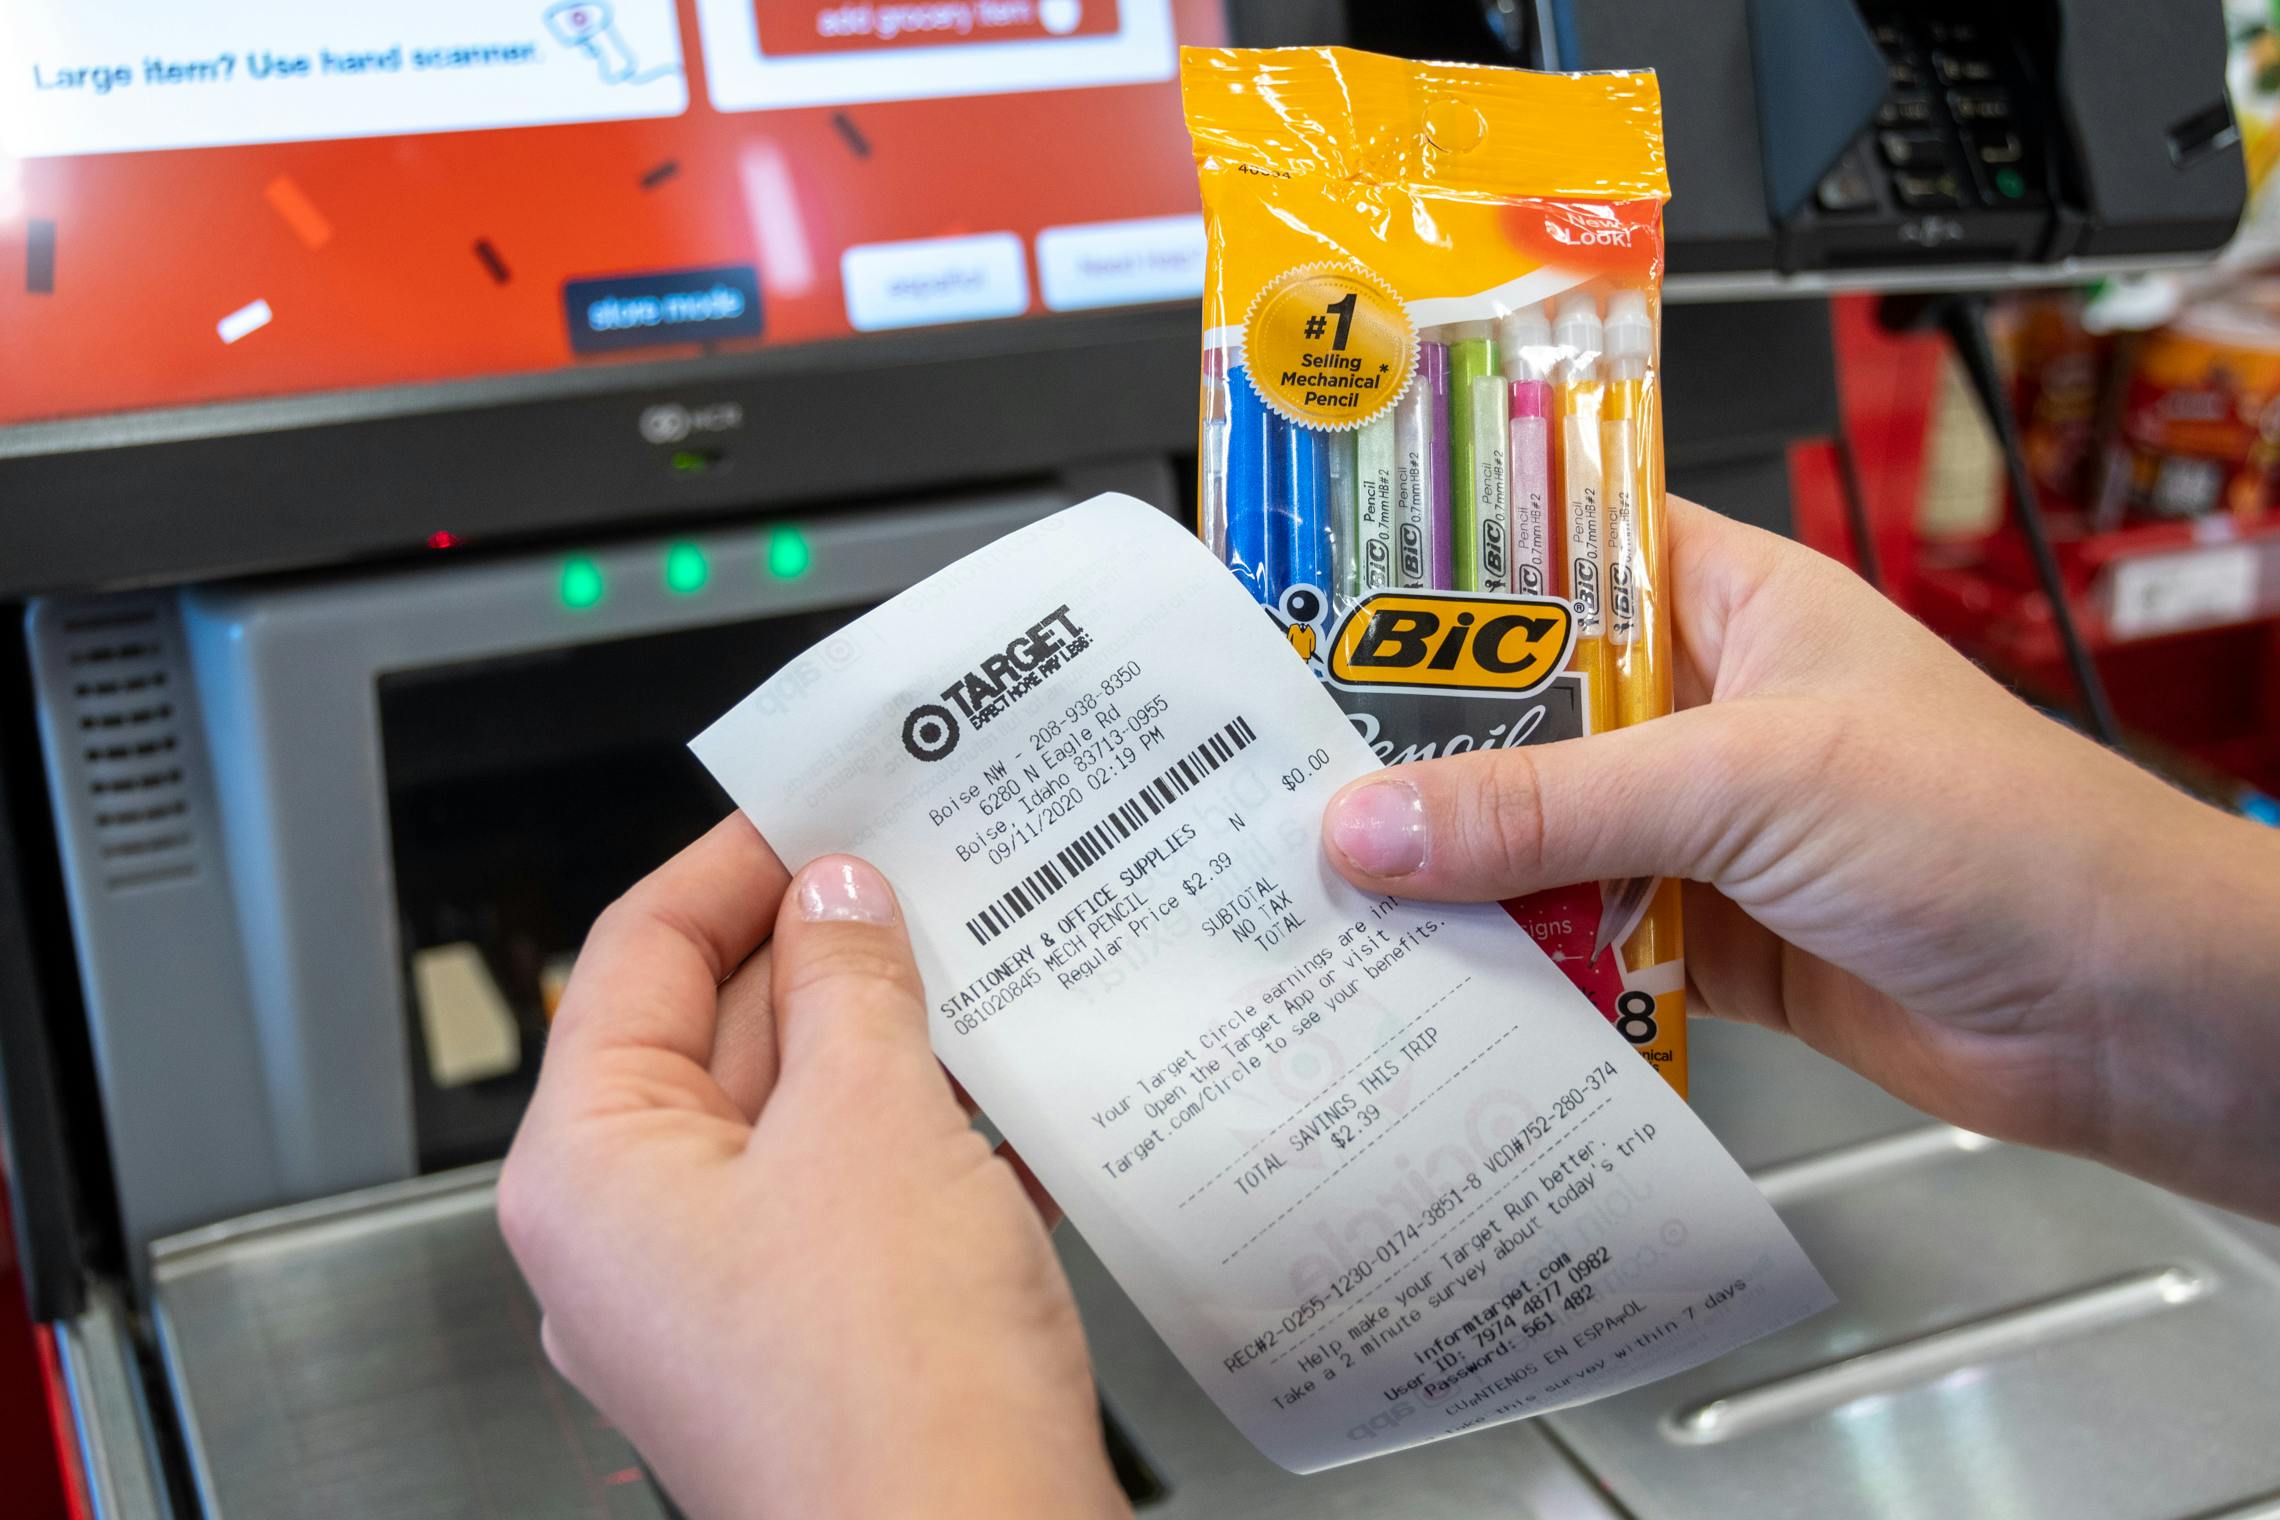 A person at the self-checkout scanner at Target, holding a receipt showing $0 balance next to a pack of BIC mechanical pencils.